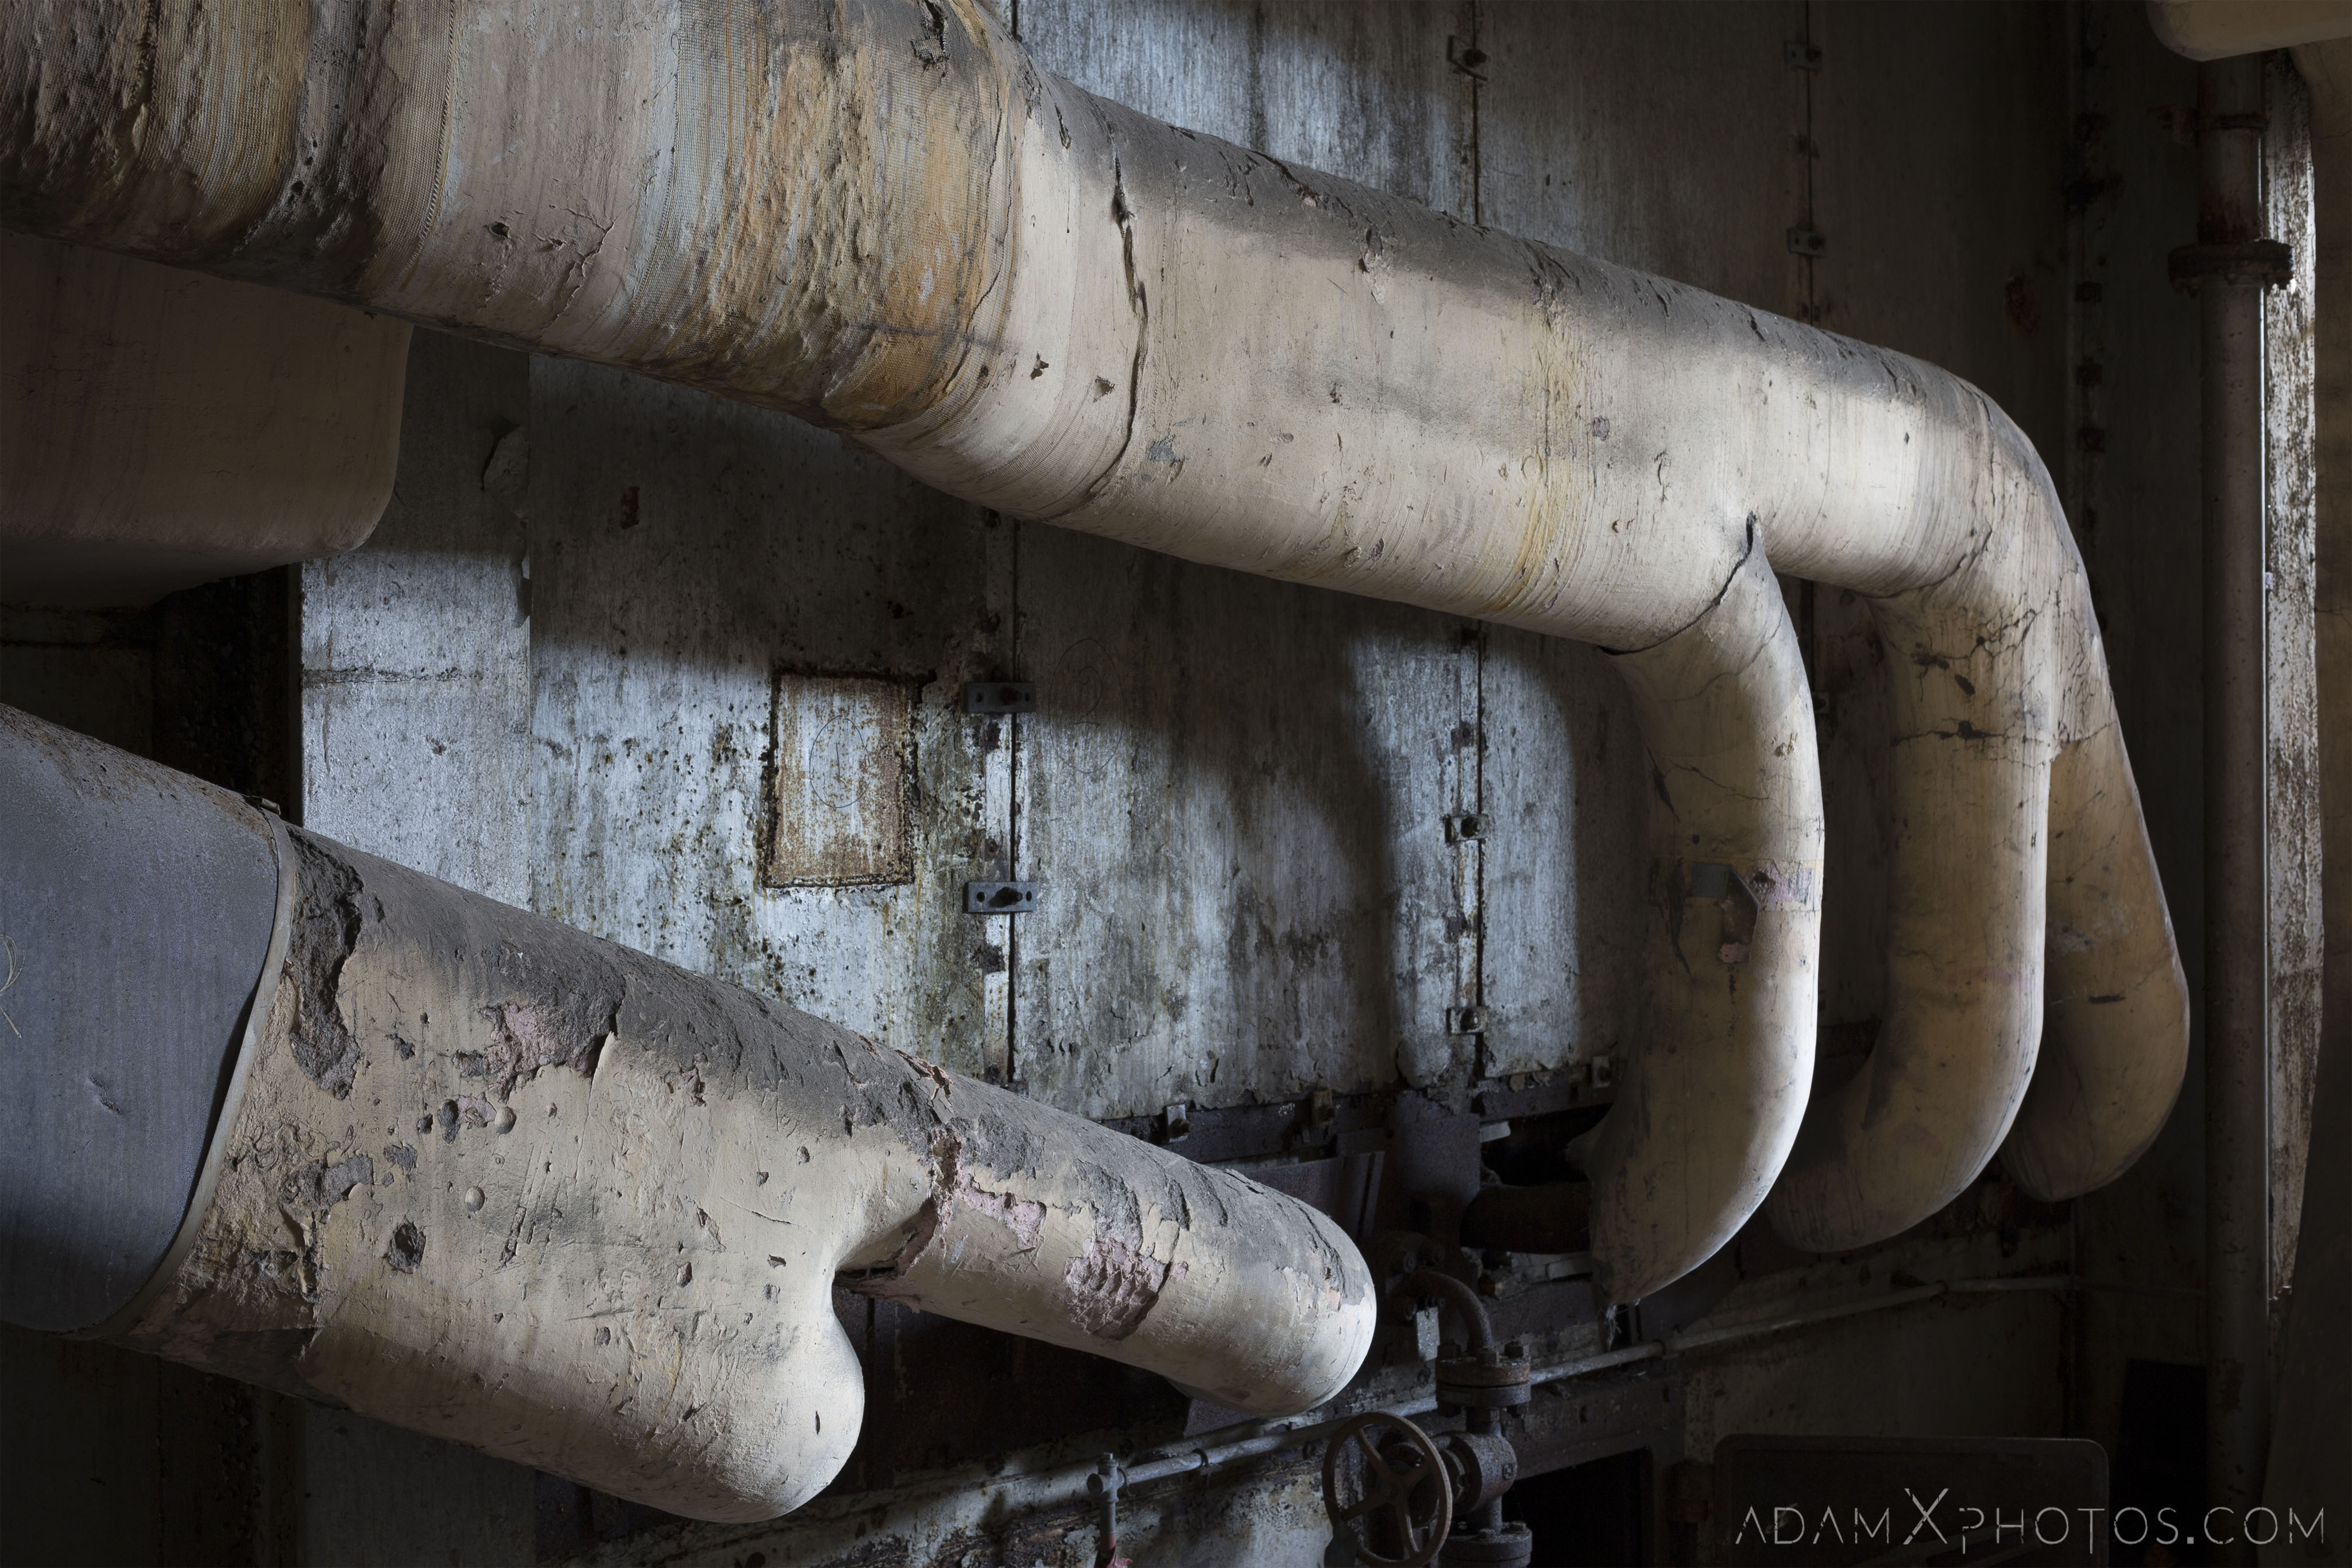 Ducts vents pipes Ardeer Power Station ICI Nobel Scotland Adam X Urbex Urban Exploration Access 2018 Abandoned decay ruins lost forgotten derelict location creepy haunting eerie